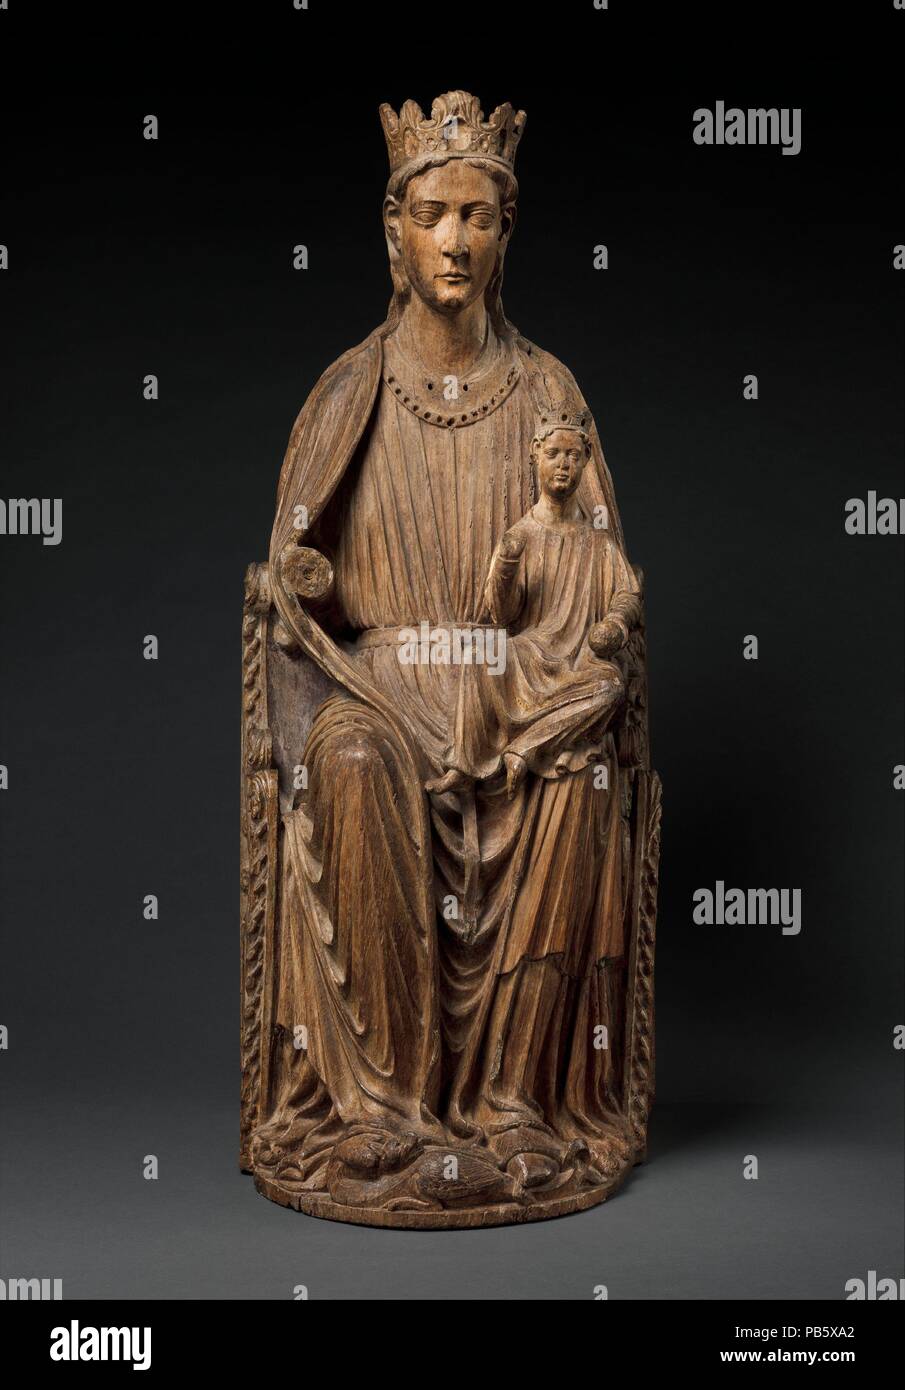 Enthroned Virgin and Child. Culture: North French. Dimensions: Overall: 48 1/2 x 20 1/4 x 19in. (123.2 x 51.4 x 48.3cm). Date: ca. 1210-20.  Crowned as the Queen of Heaven, Mary is seated on a richly ornamented throne, while the infant Jesus holds an orb or apple and blesses. Mary also tramples a dragon in triumph--a visual reference to the Book of Genesis (3:15), in which God declares to the serpent, 'I will put enmity between thee and the woman.' The fluid drapery style is a hallmark of northern sculpture about 1200. Museum: Metropolitan Museum of Art, New York, USA. Stock Photo